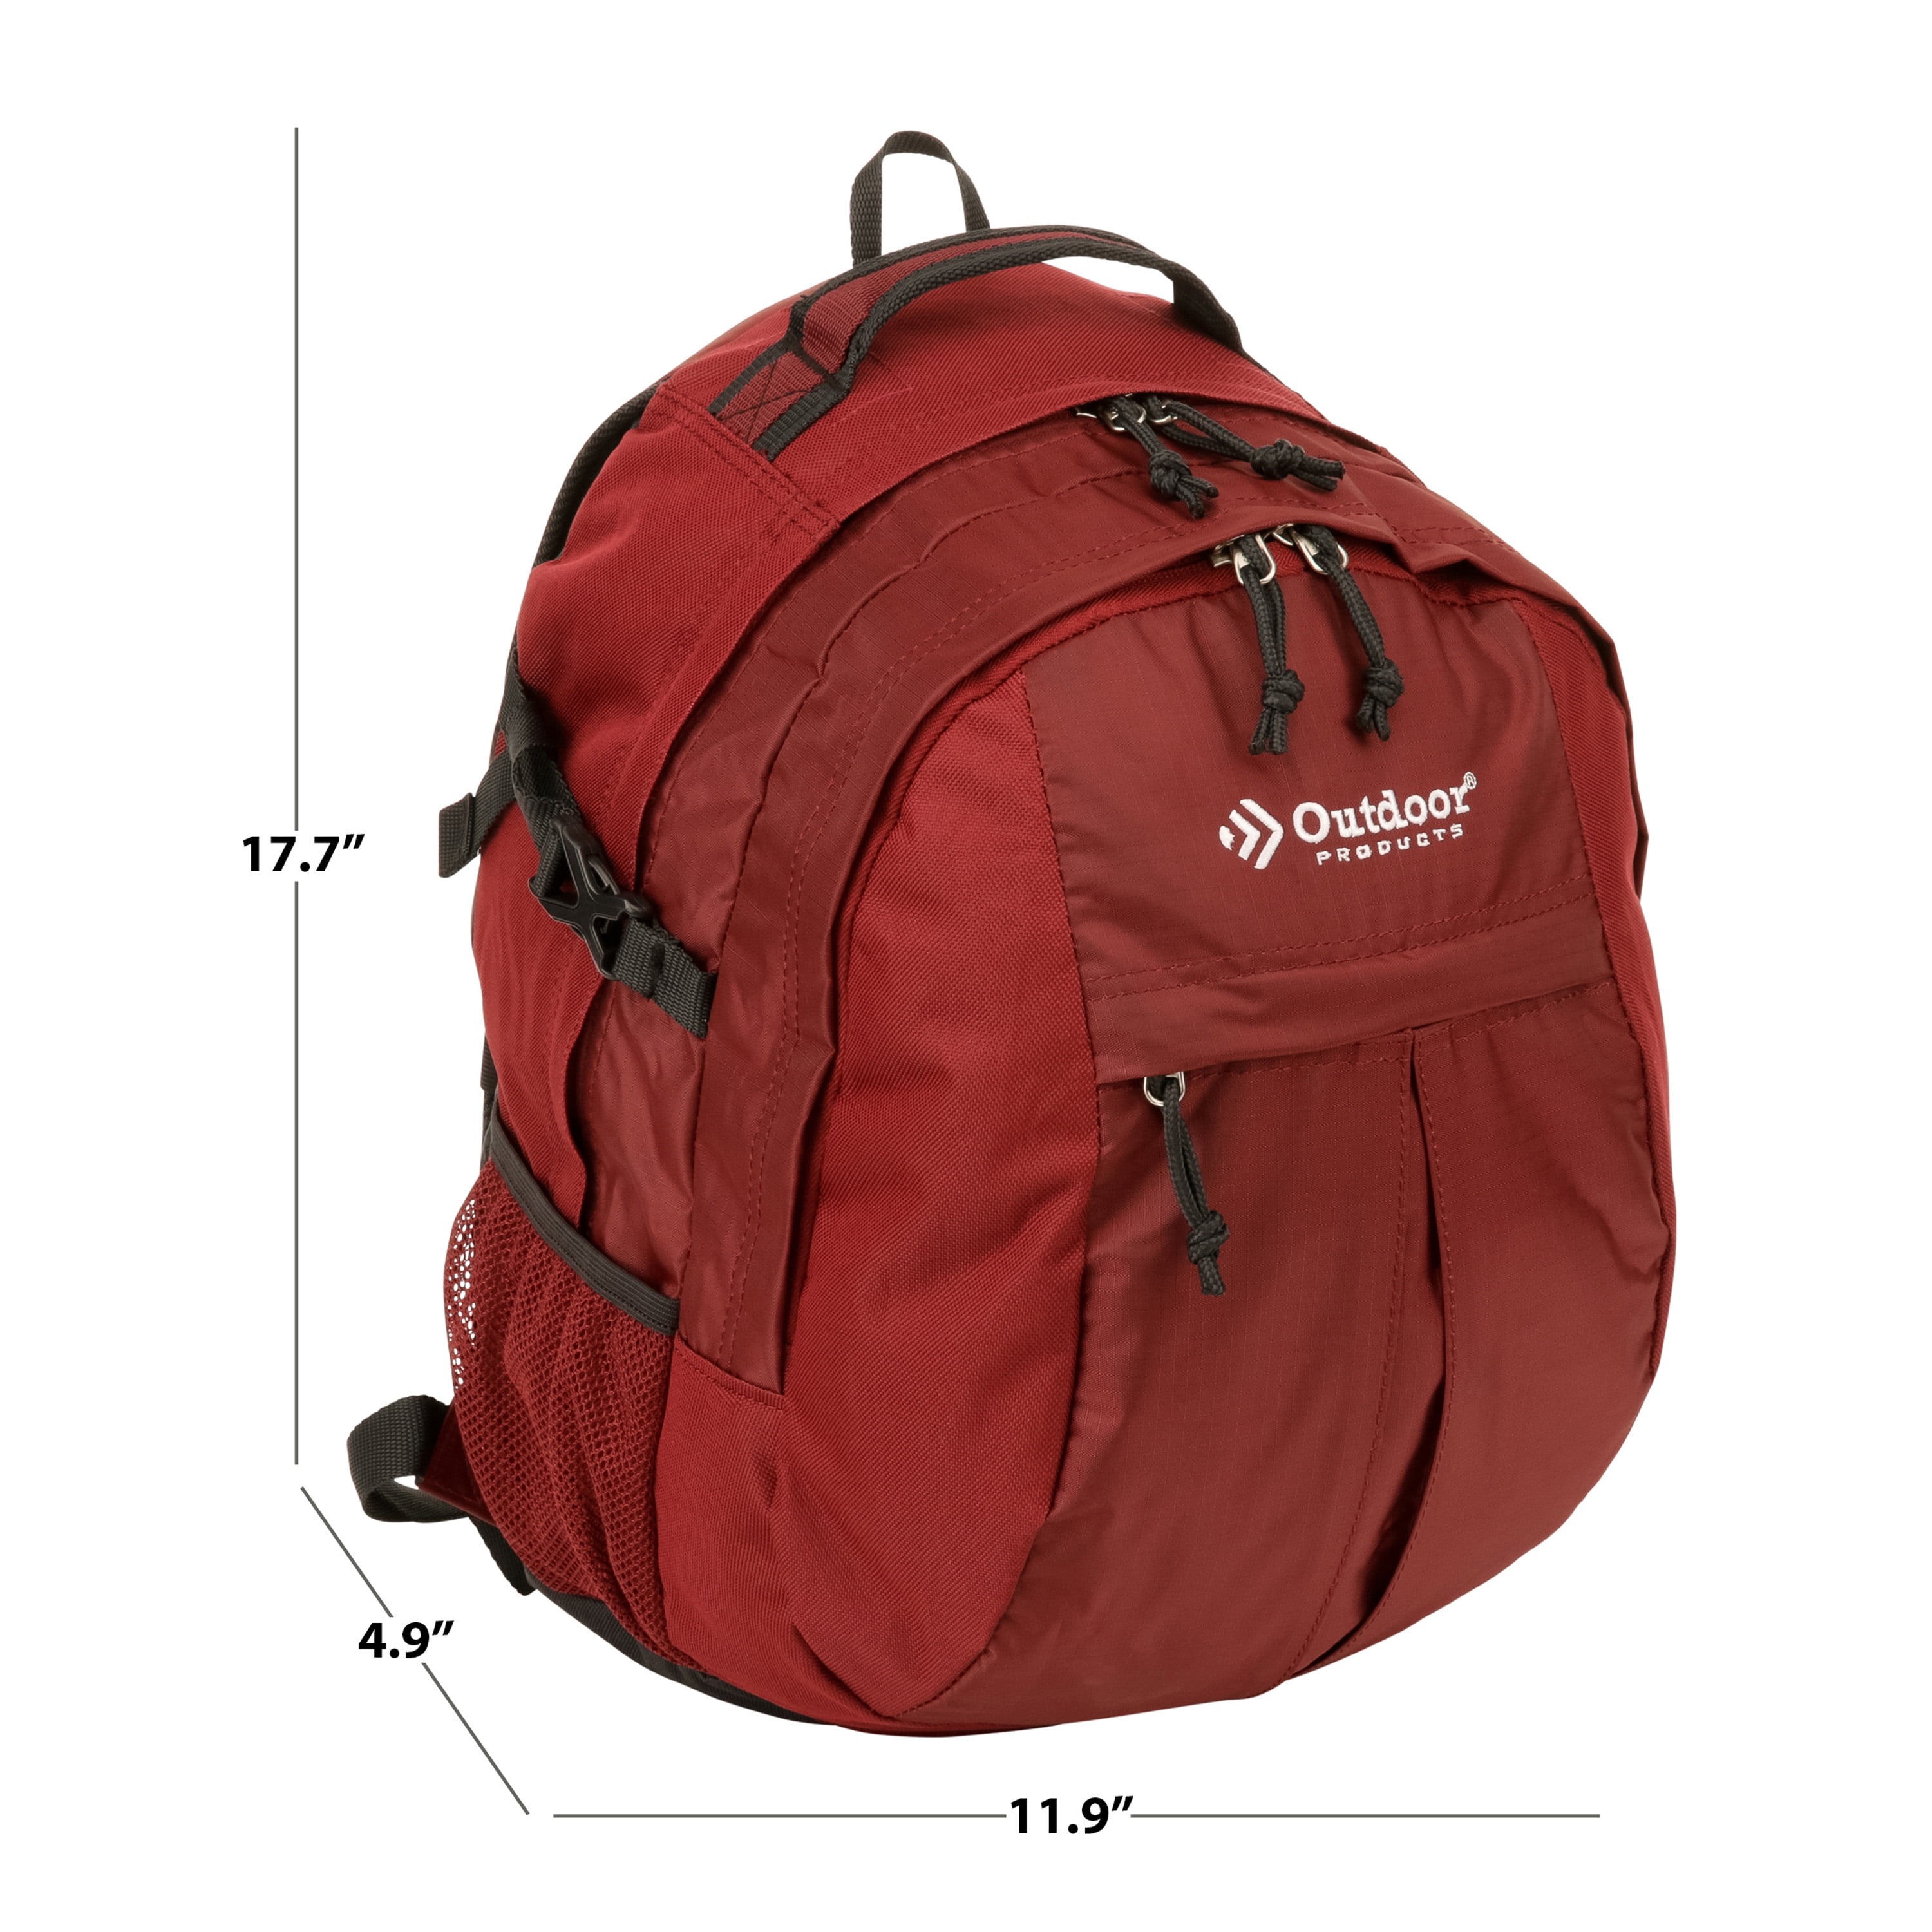 GREY TRAVERSE COOLER BACKPACK - ONLINE ONLY: University of Louisville